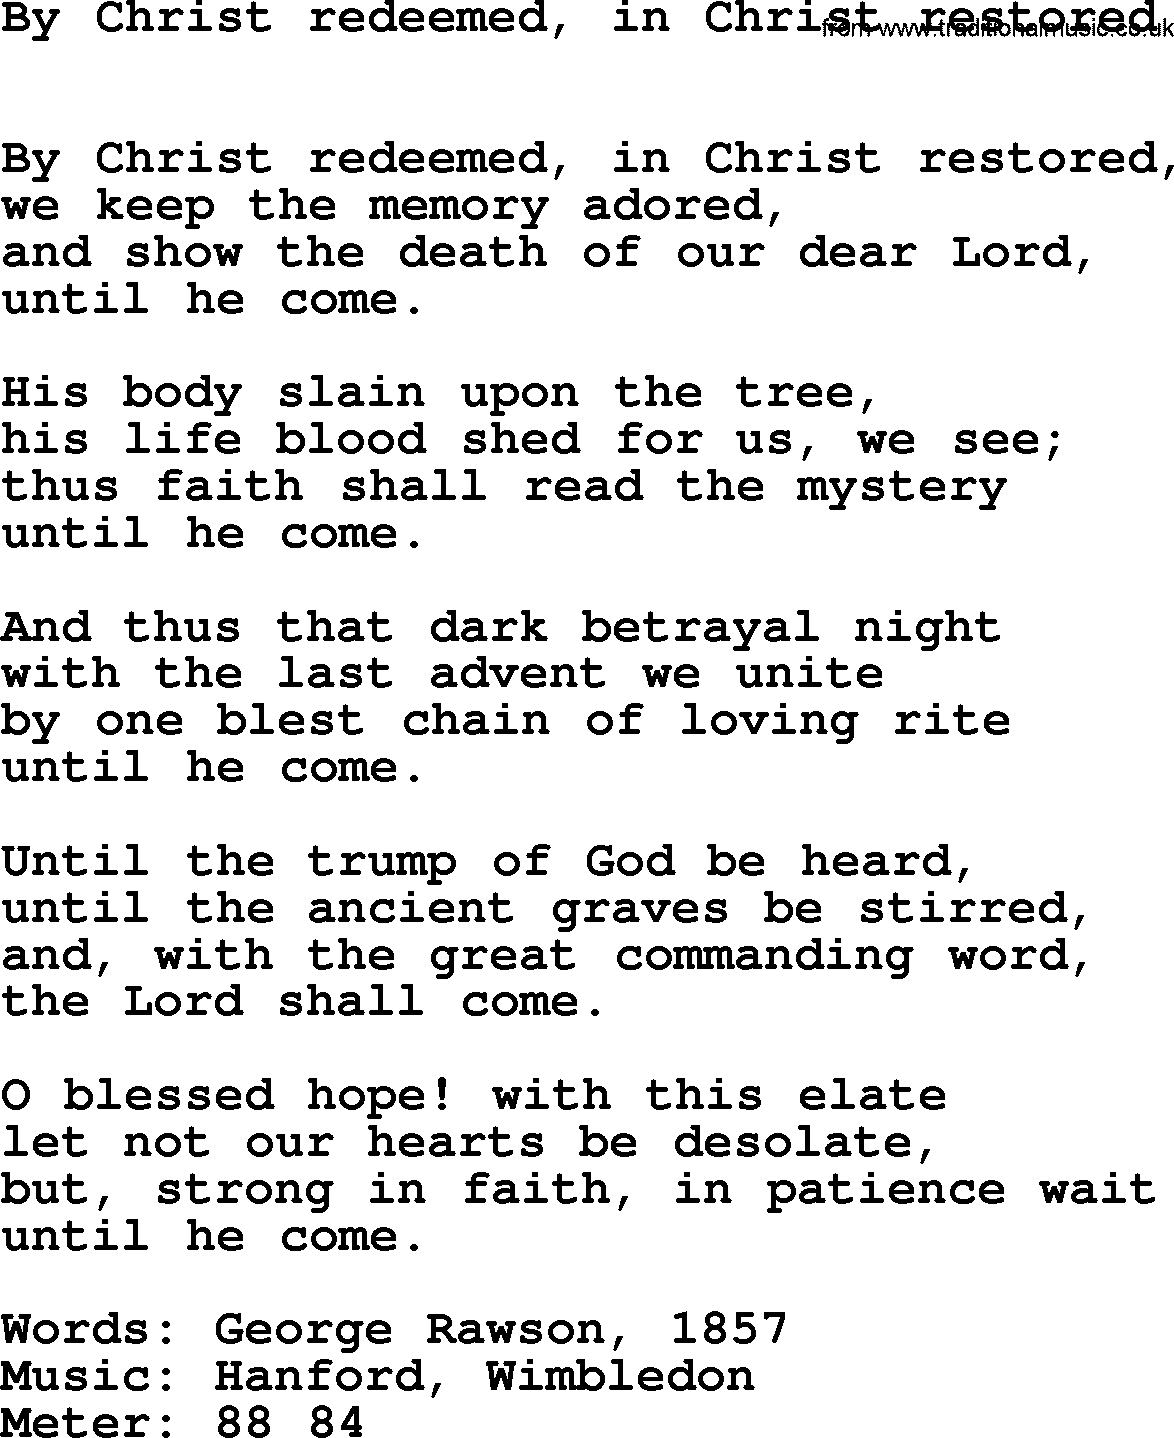 Book of Common Praise Hymn: By Christ Redeemed, In Christ Restored.txt lyrics with midi music